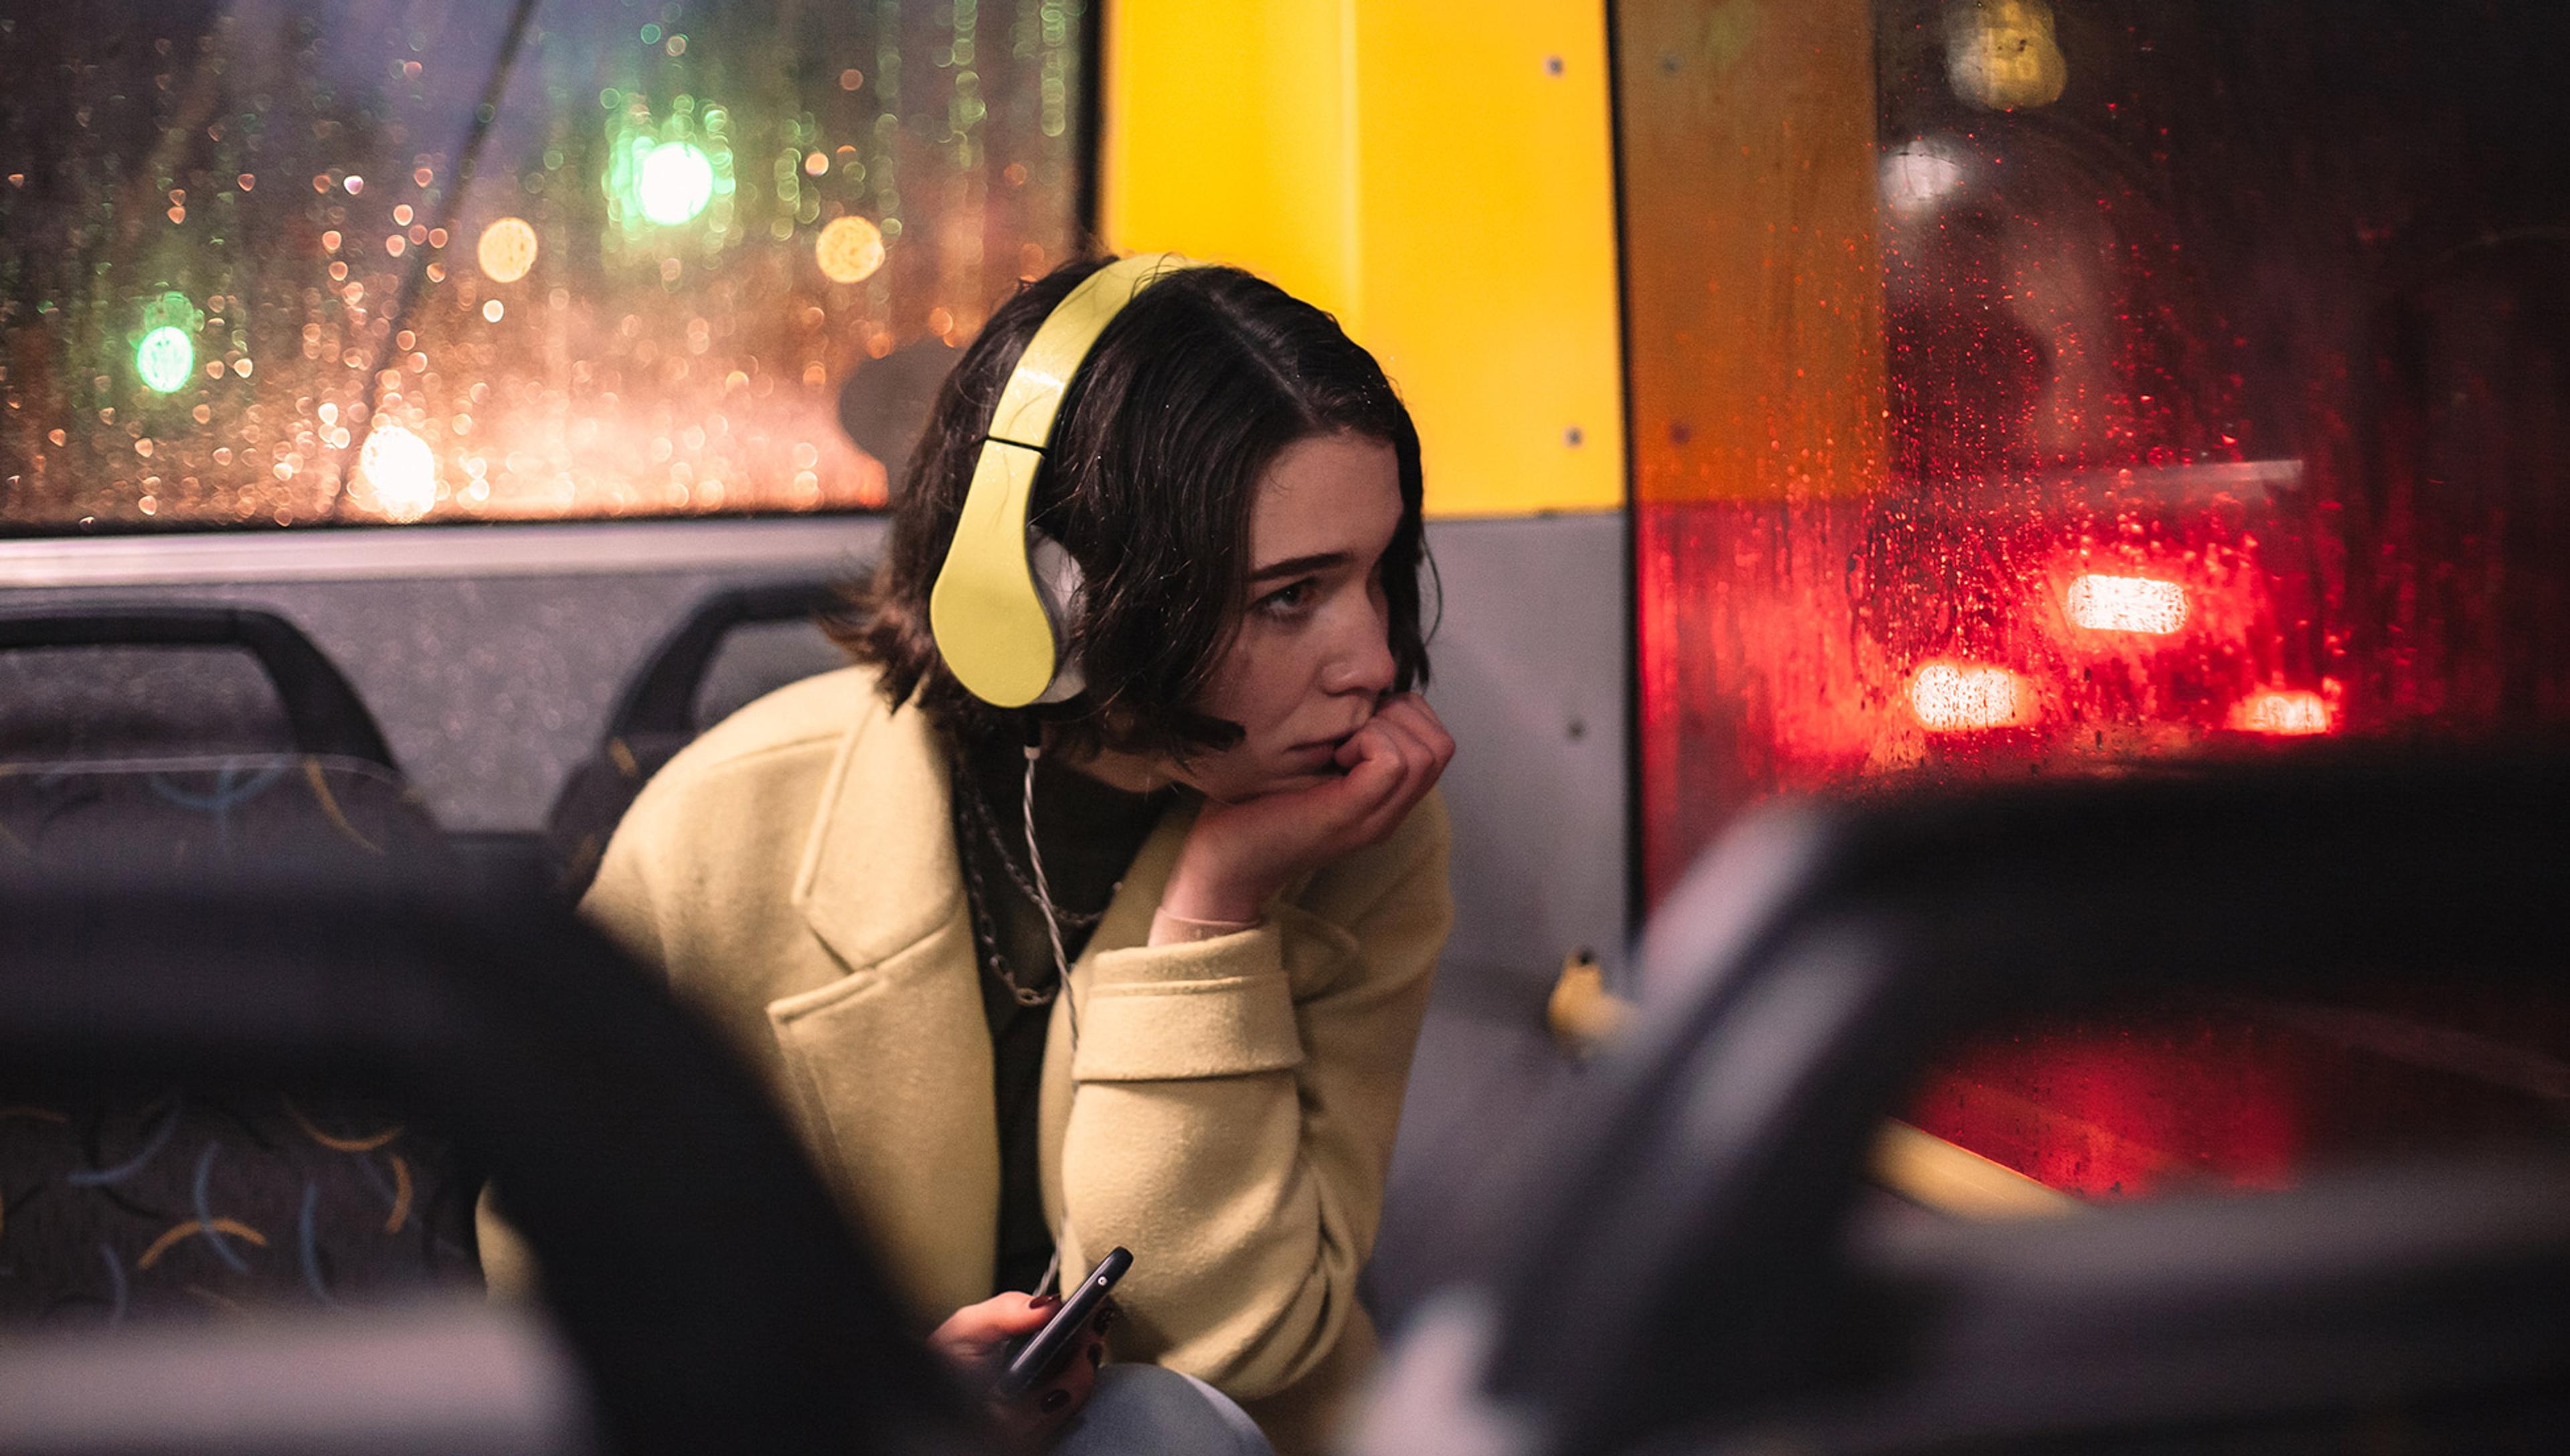 A pensive-looking woman is listening to headphones on a bus on a rainy evening